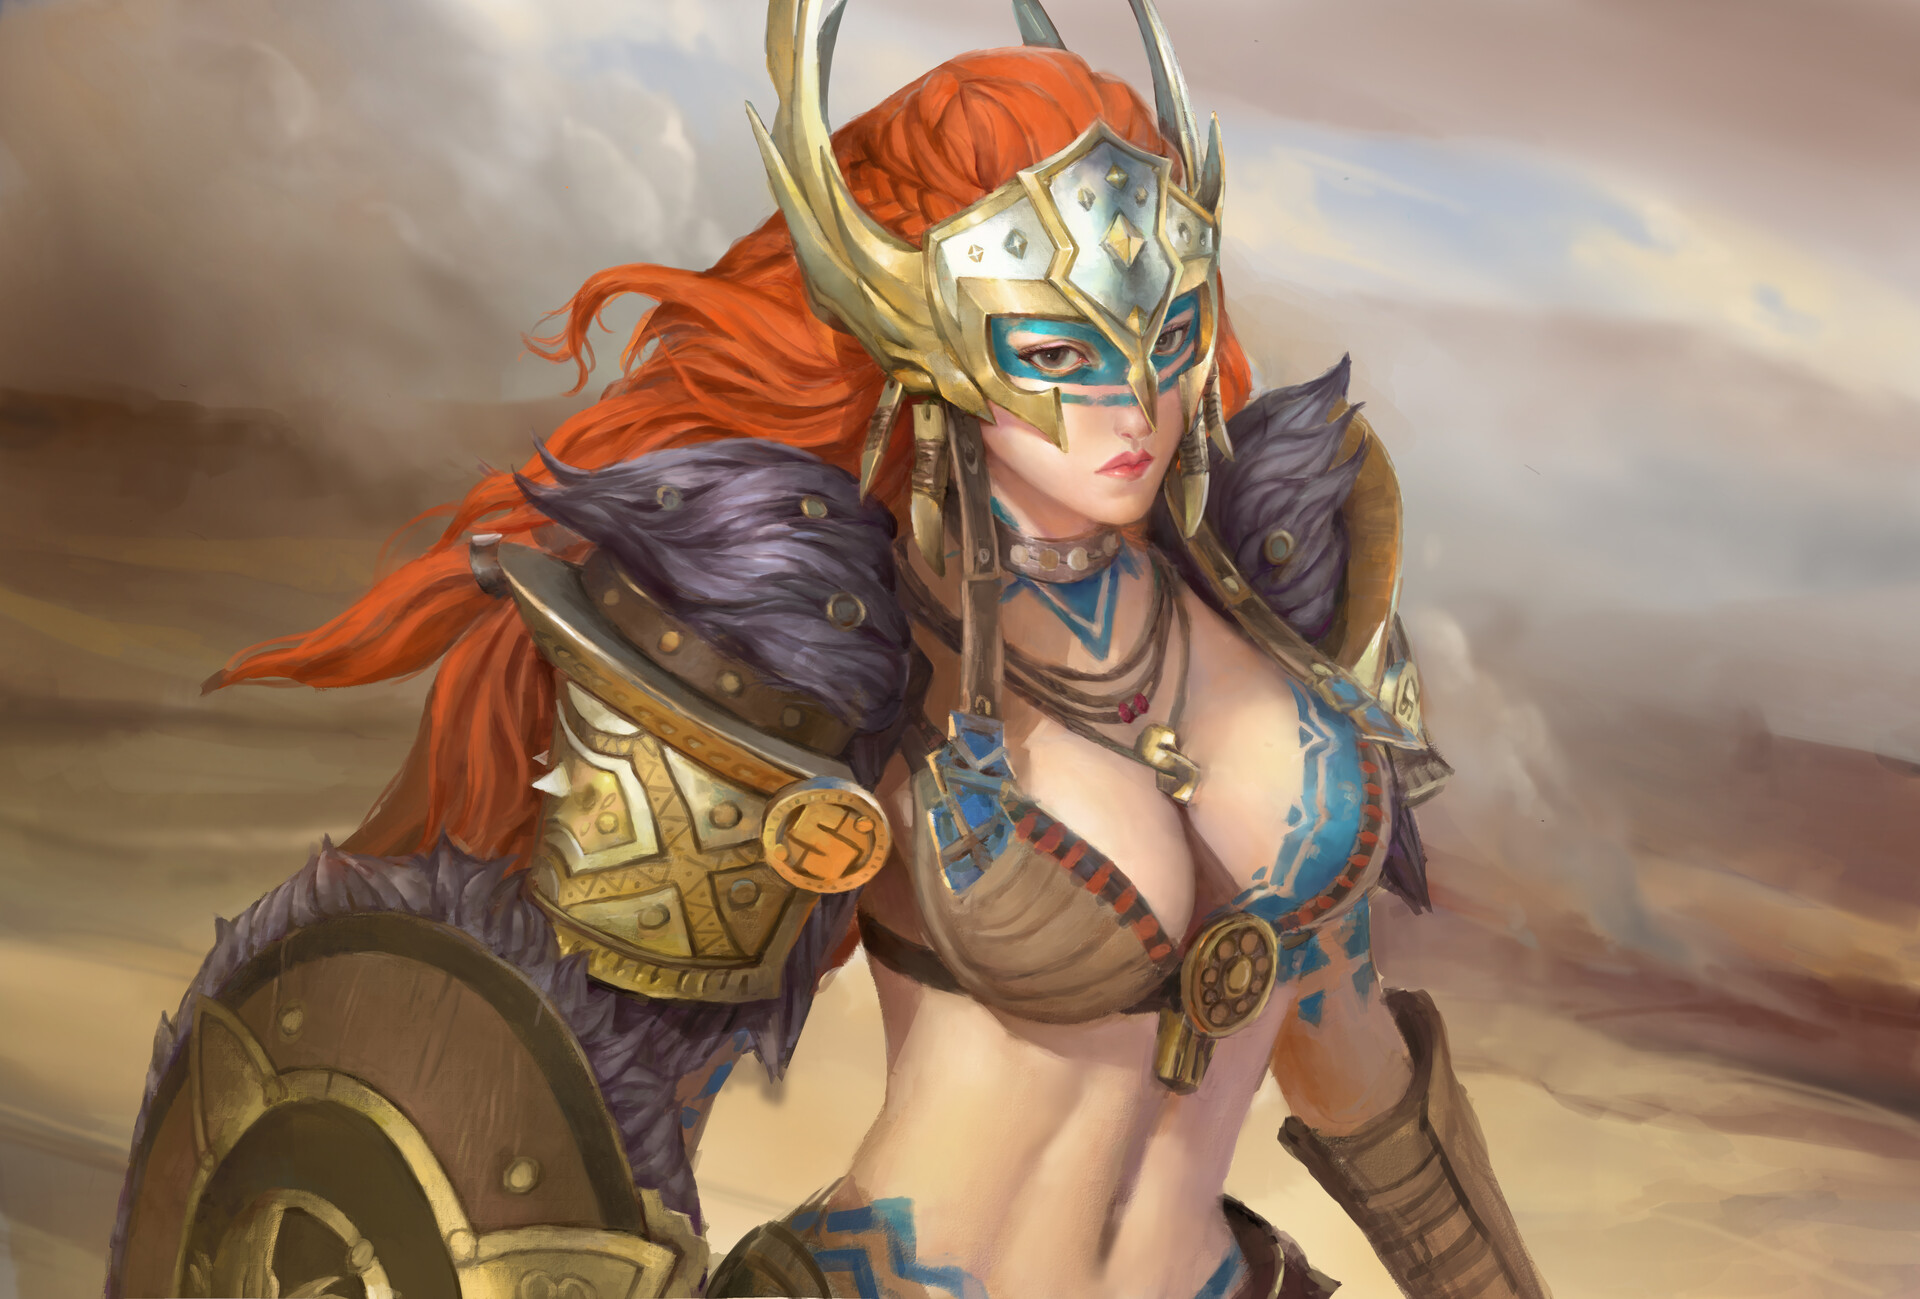 Valkyrie from Raid Shadow Legends by 美玲 陈. 